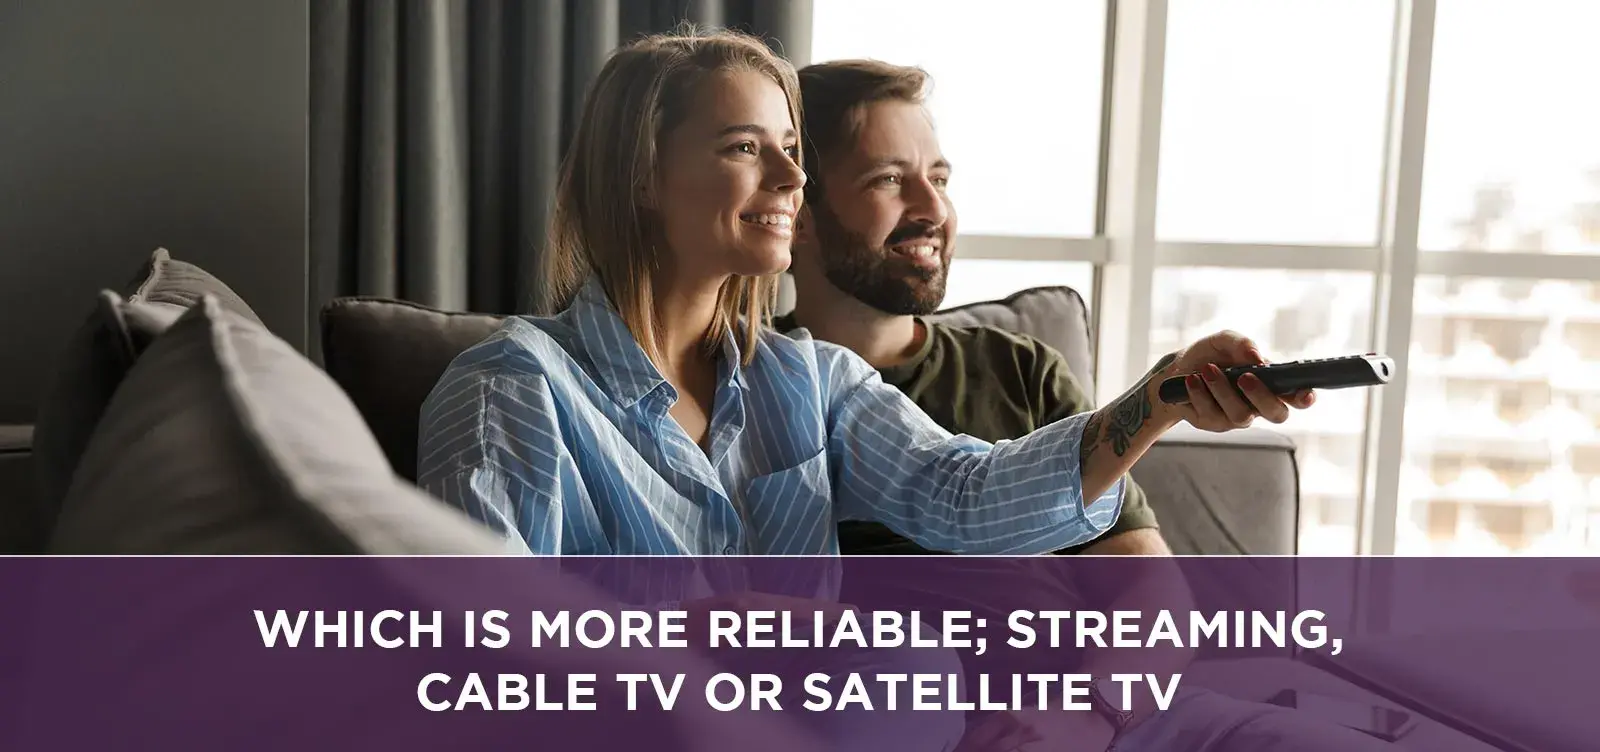 Which is more reliable; streaming, cable TV or satellite TV